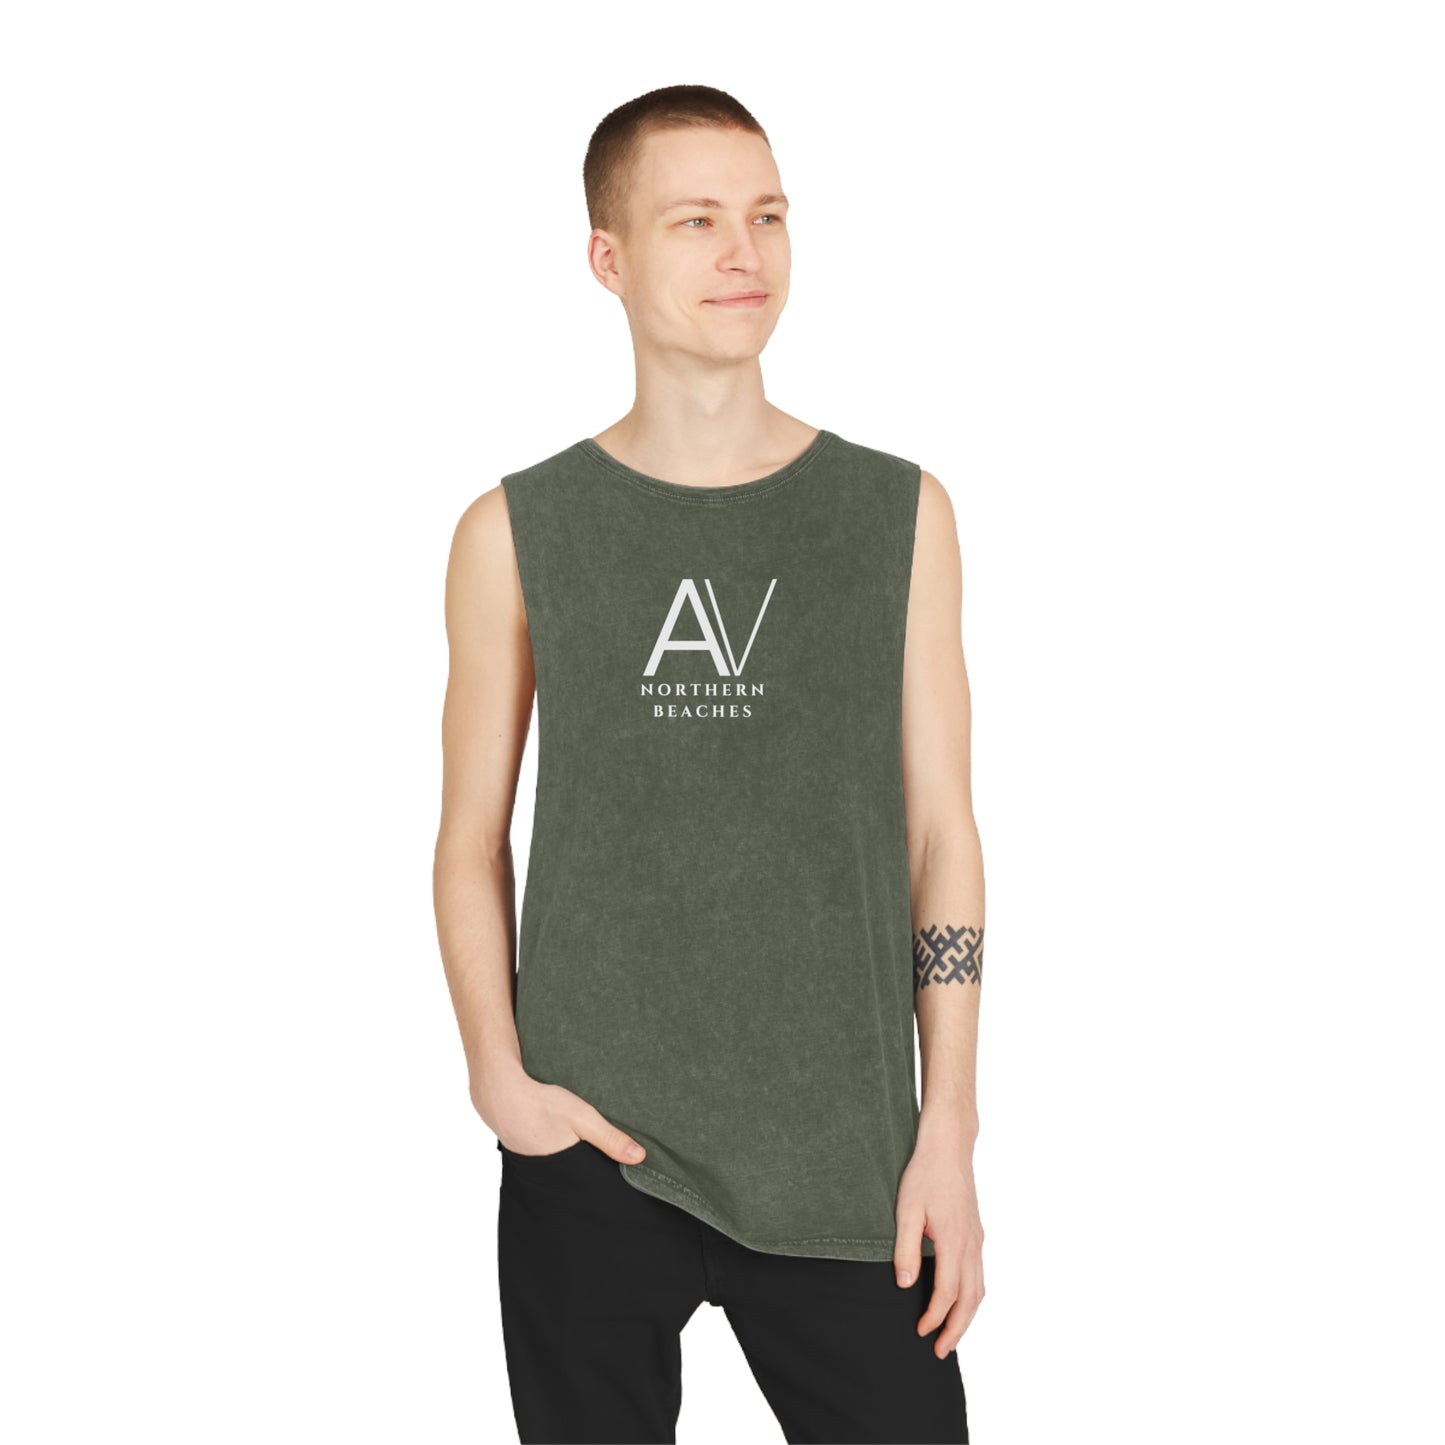 Stonewash Tank Top with Northern Beaches logo designs made to order